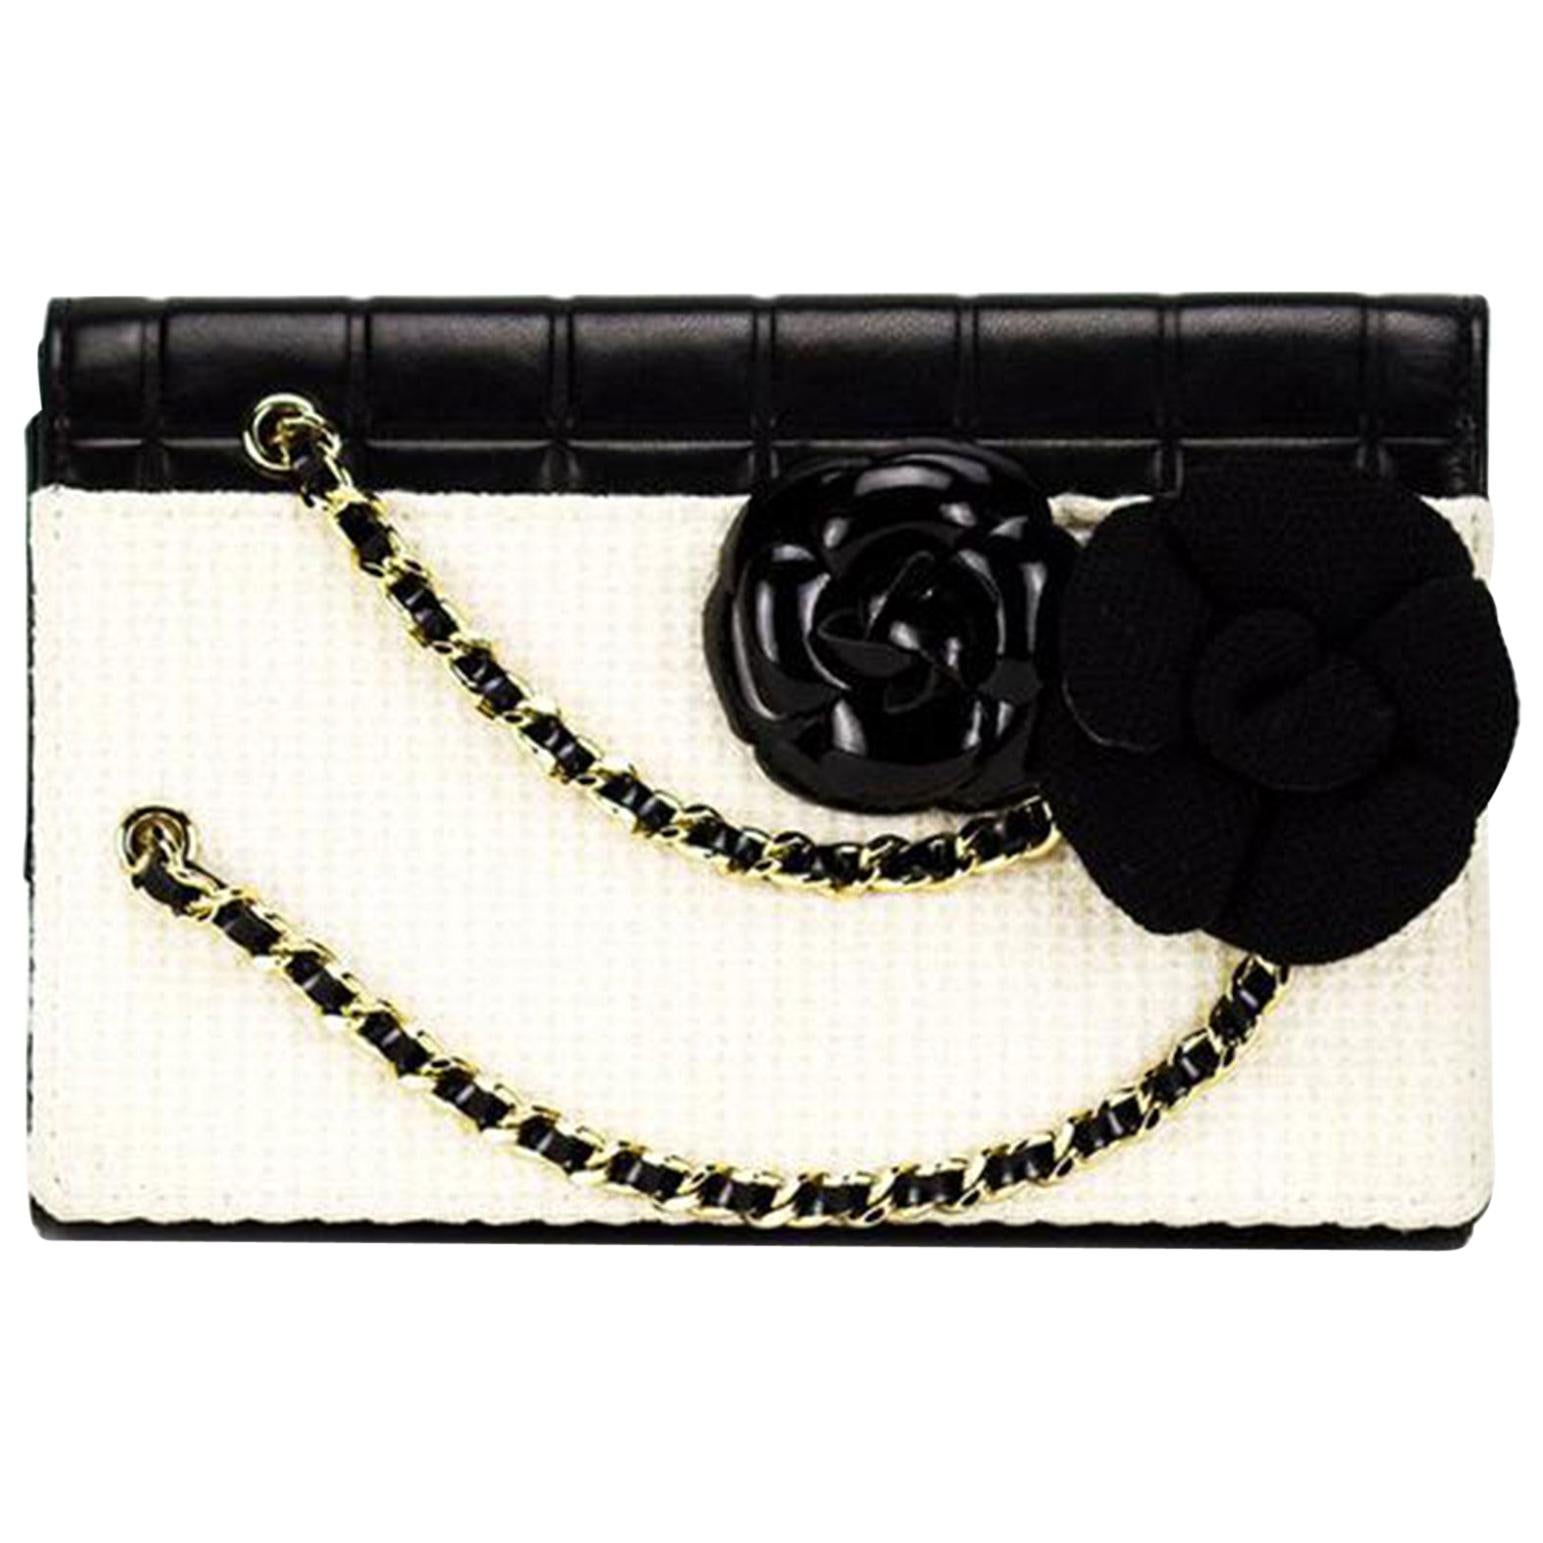 Chanel Timeless Tweed Iconic Camelia Flower Bicolor Black & White Leather Clutch